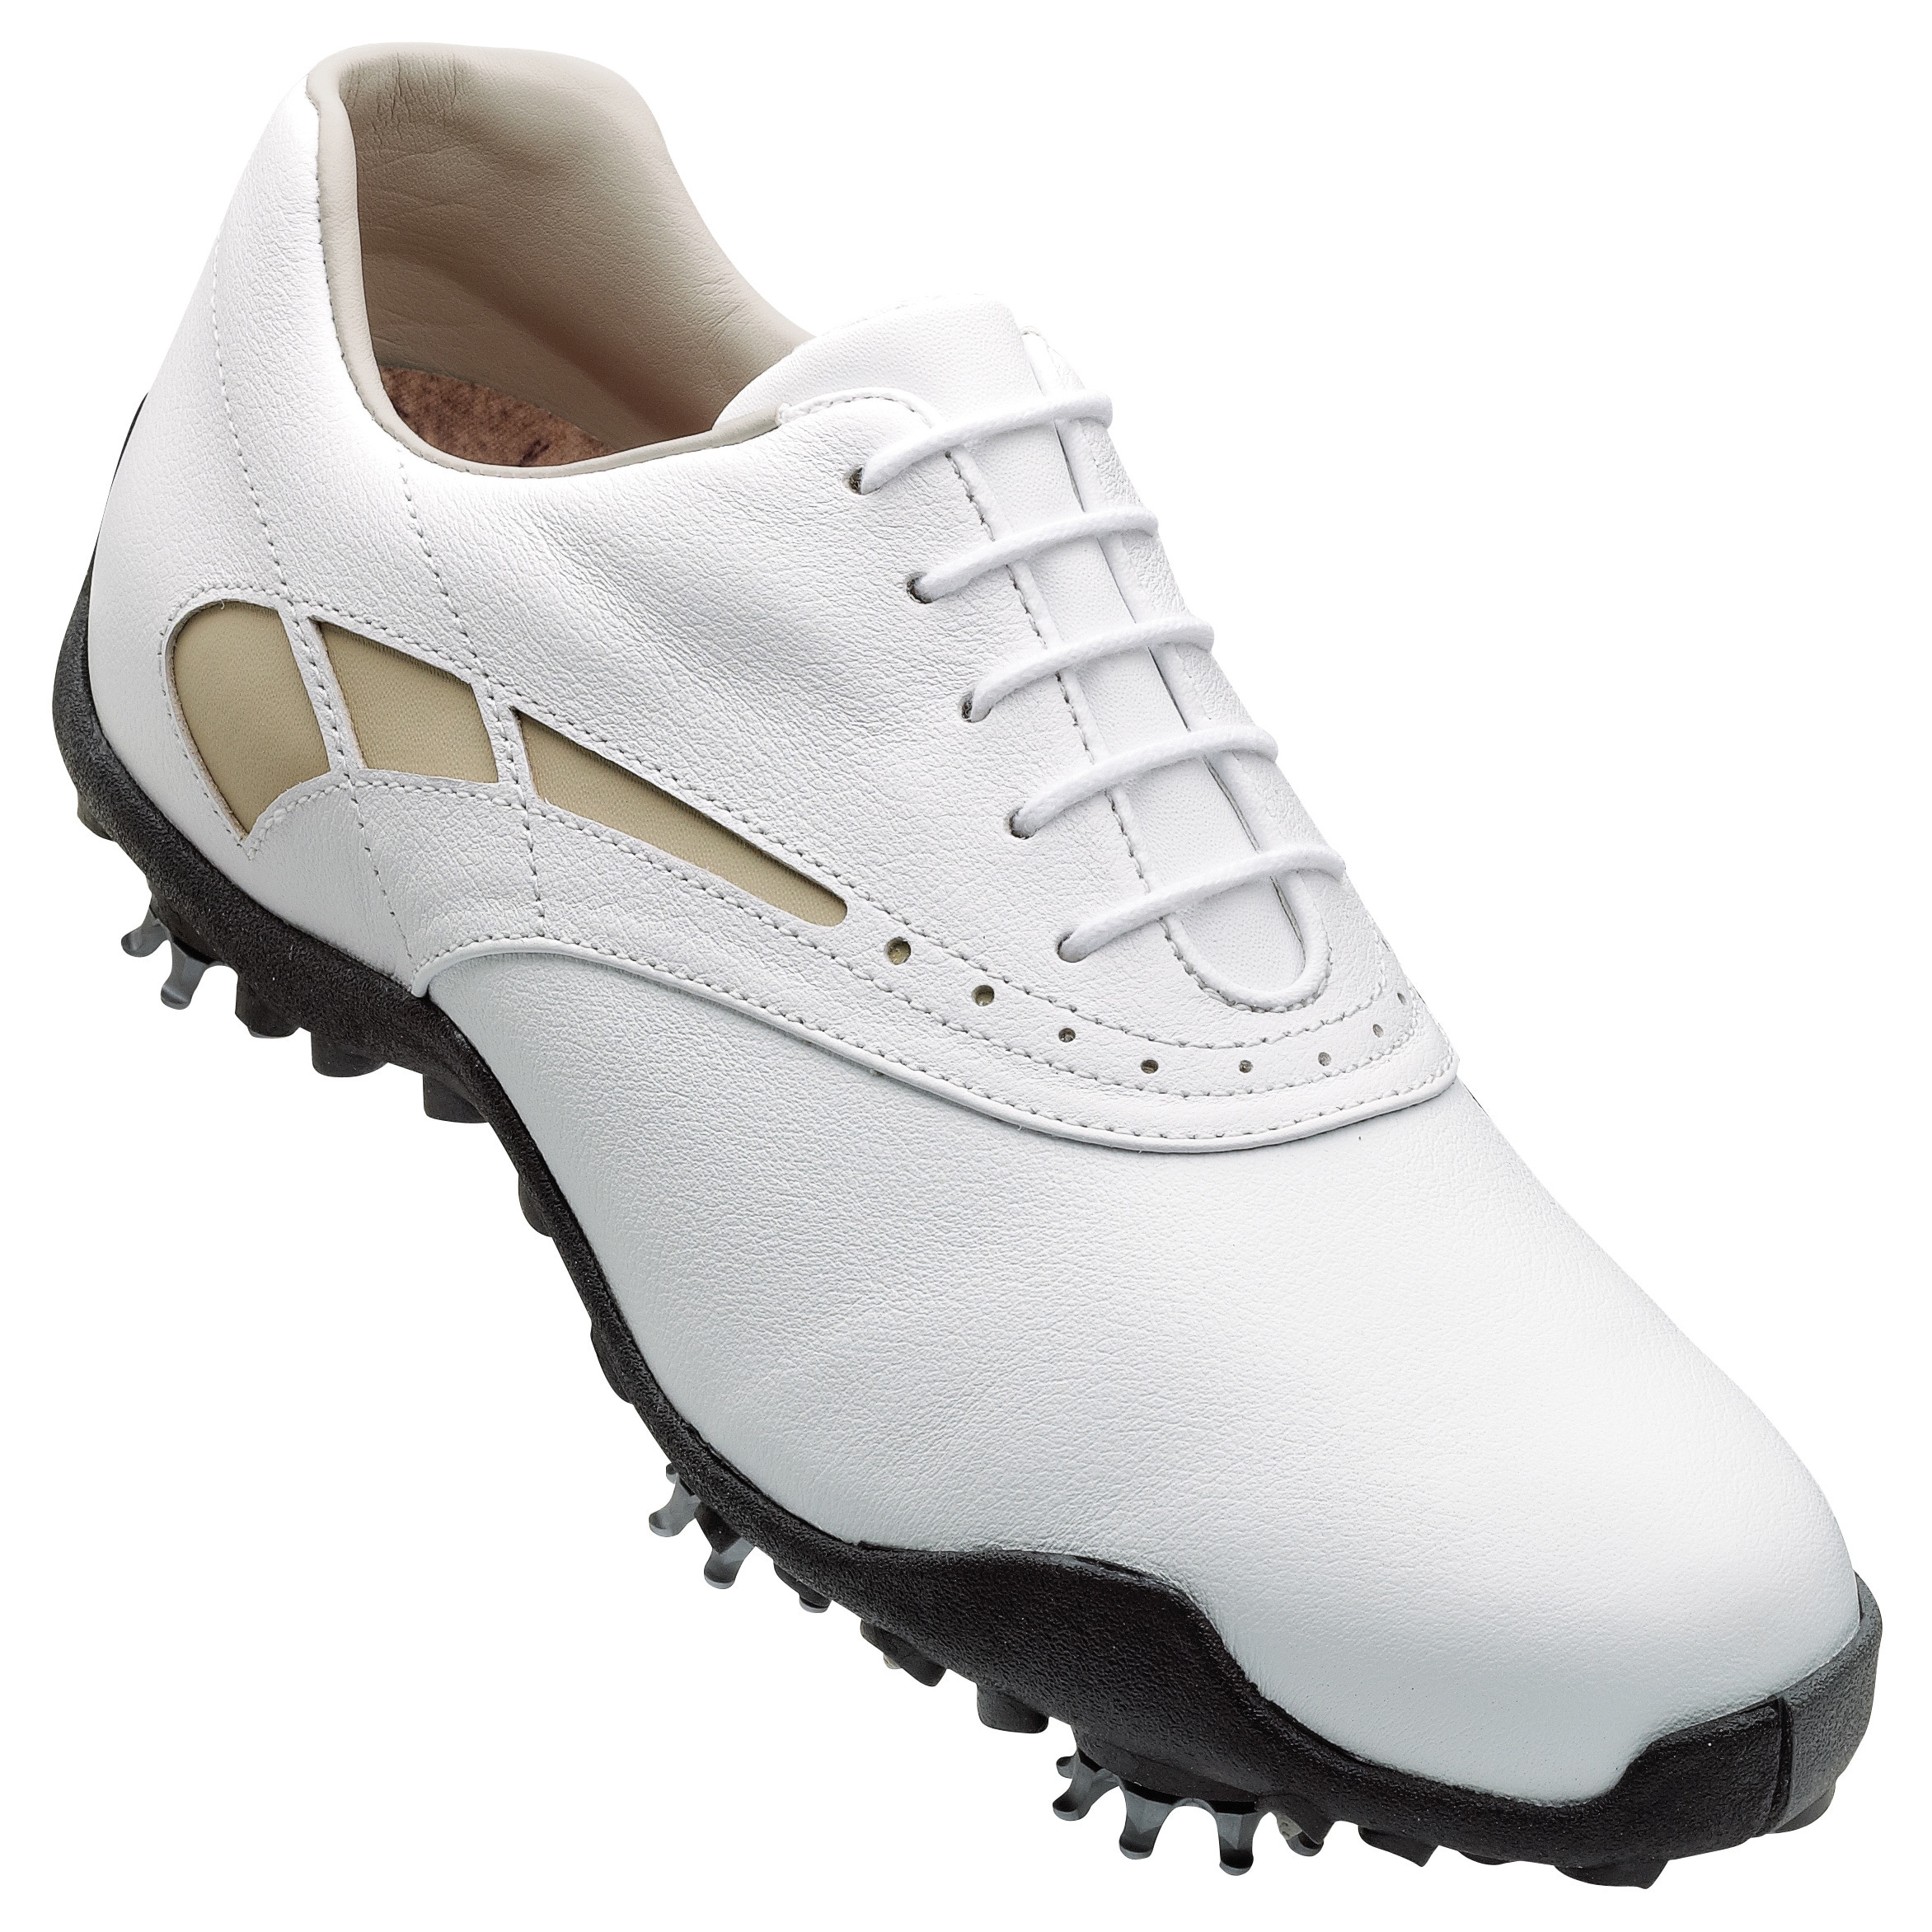 footjoy lopro collection women's golf shoes